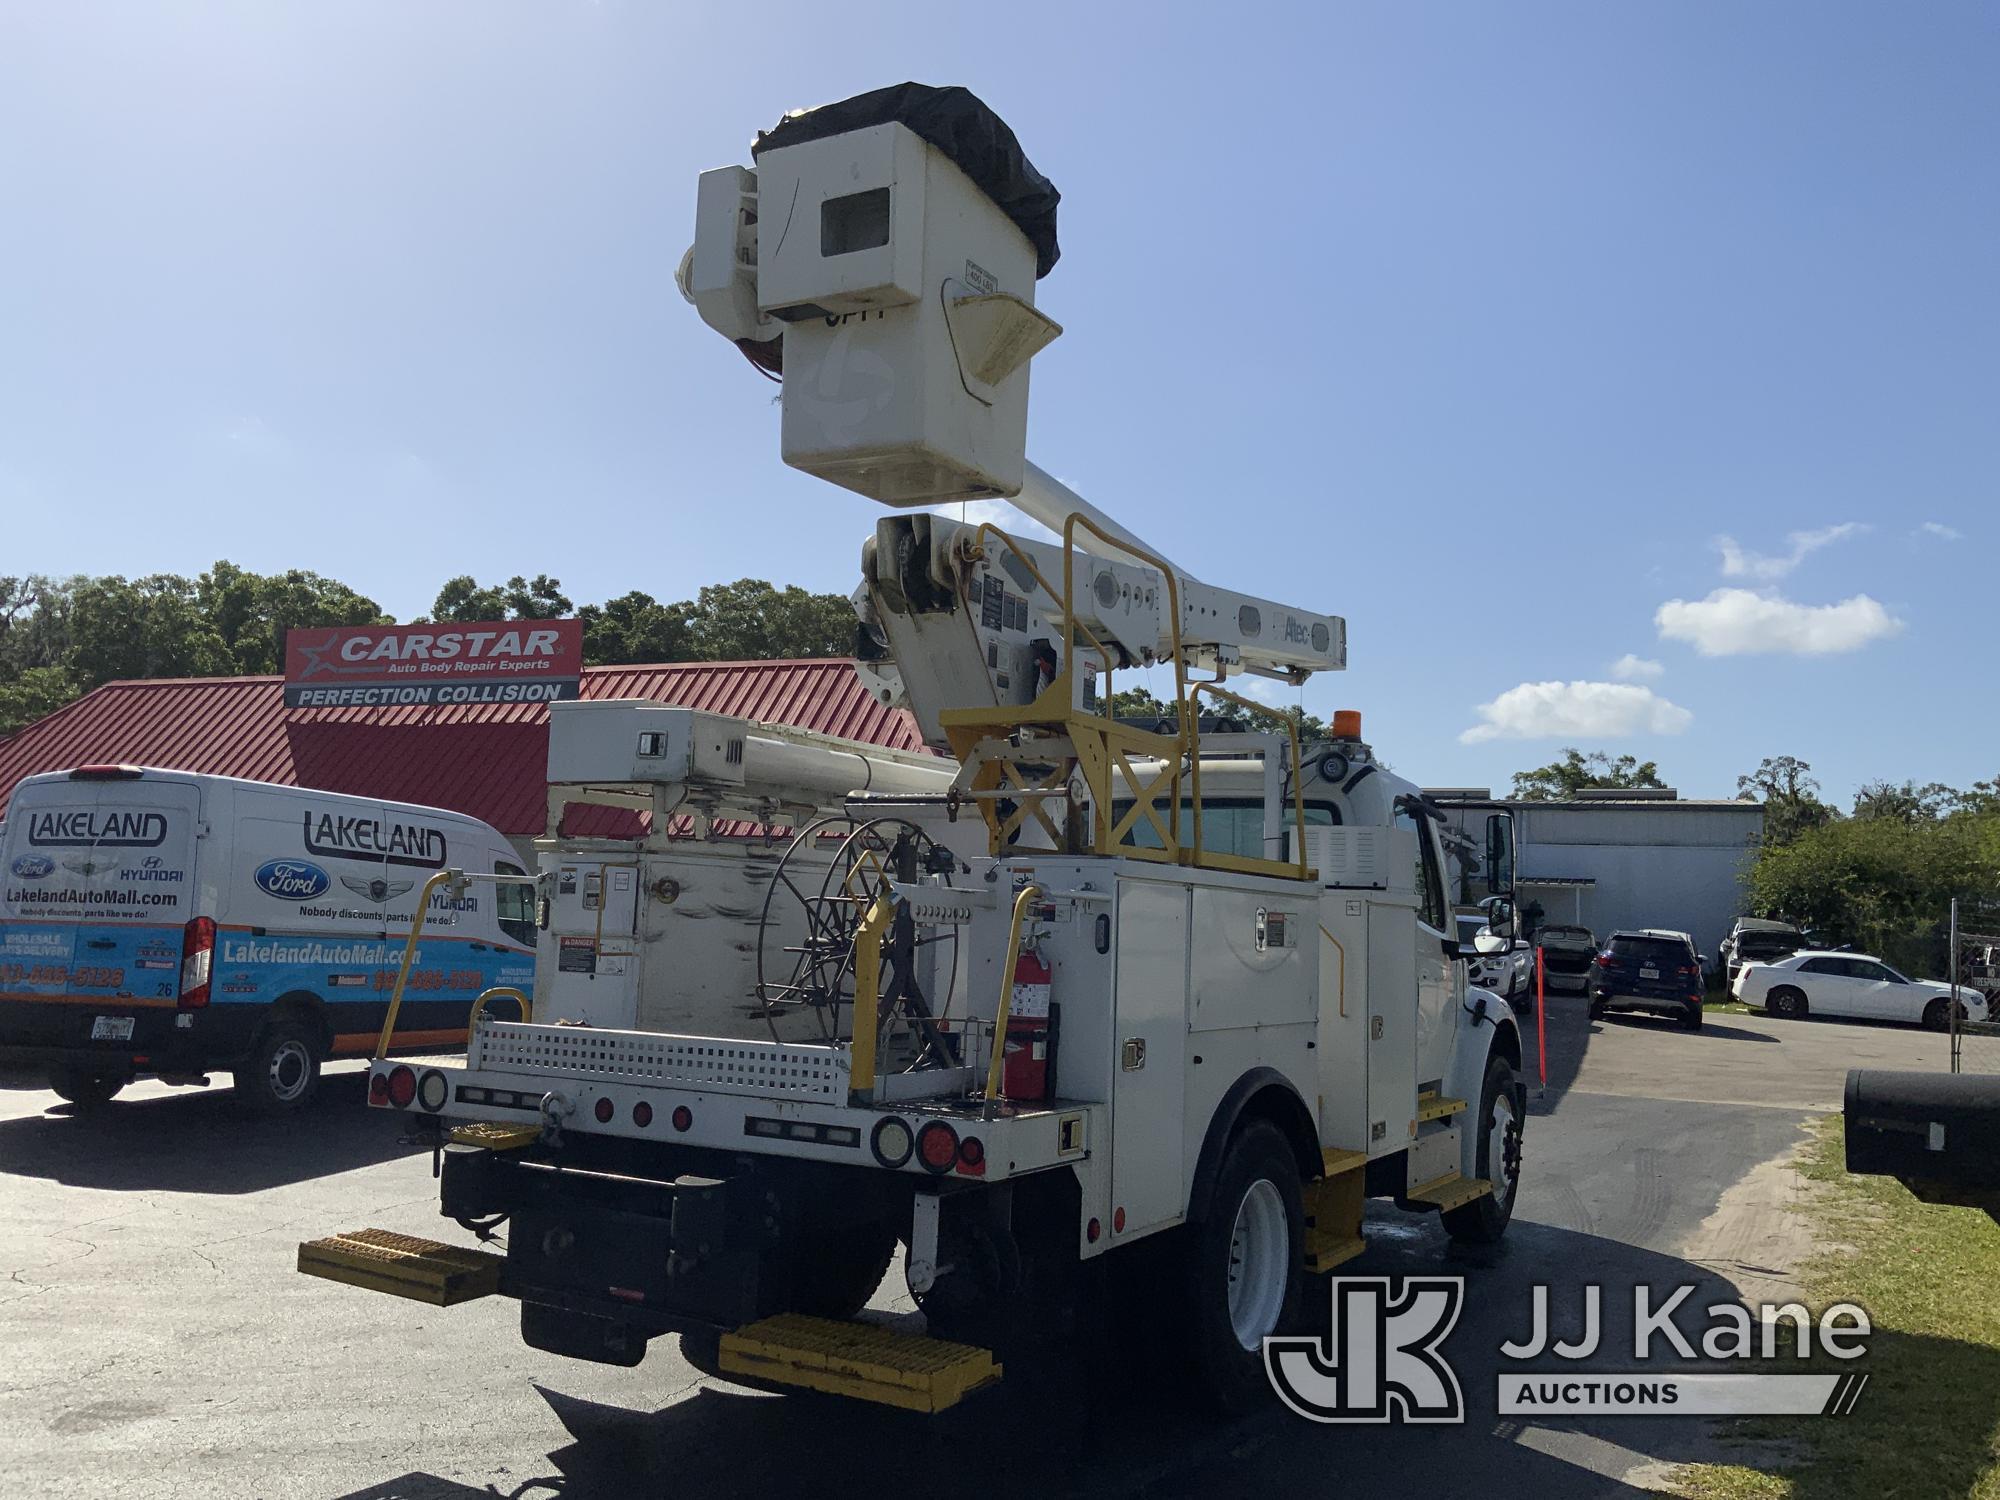 (Ocala, FL) Altec L42A, Over-Center Bucket Truck center mounted on 2013 Freightliner M2 106 Utility